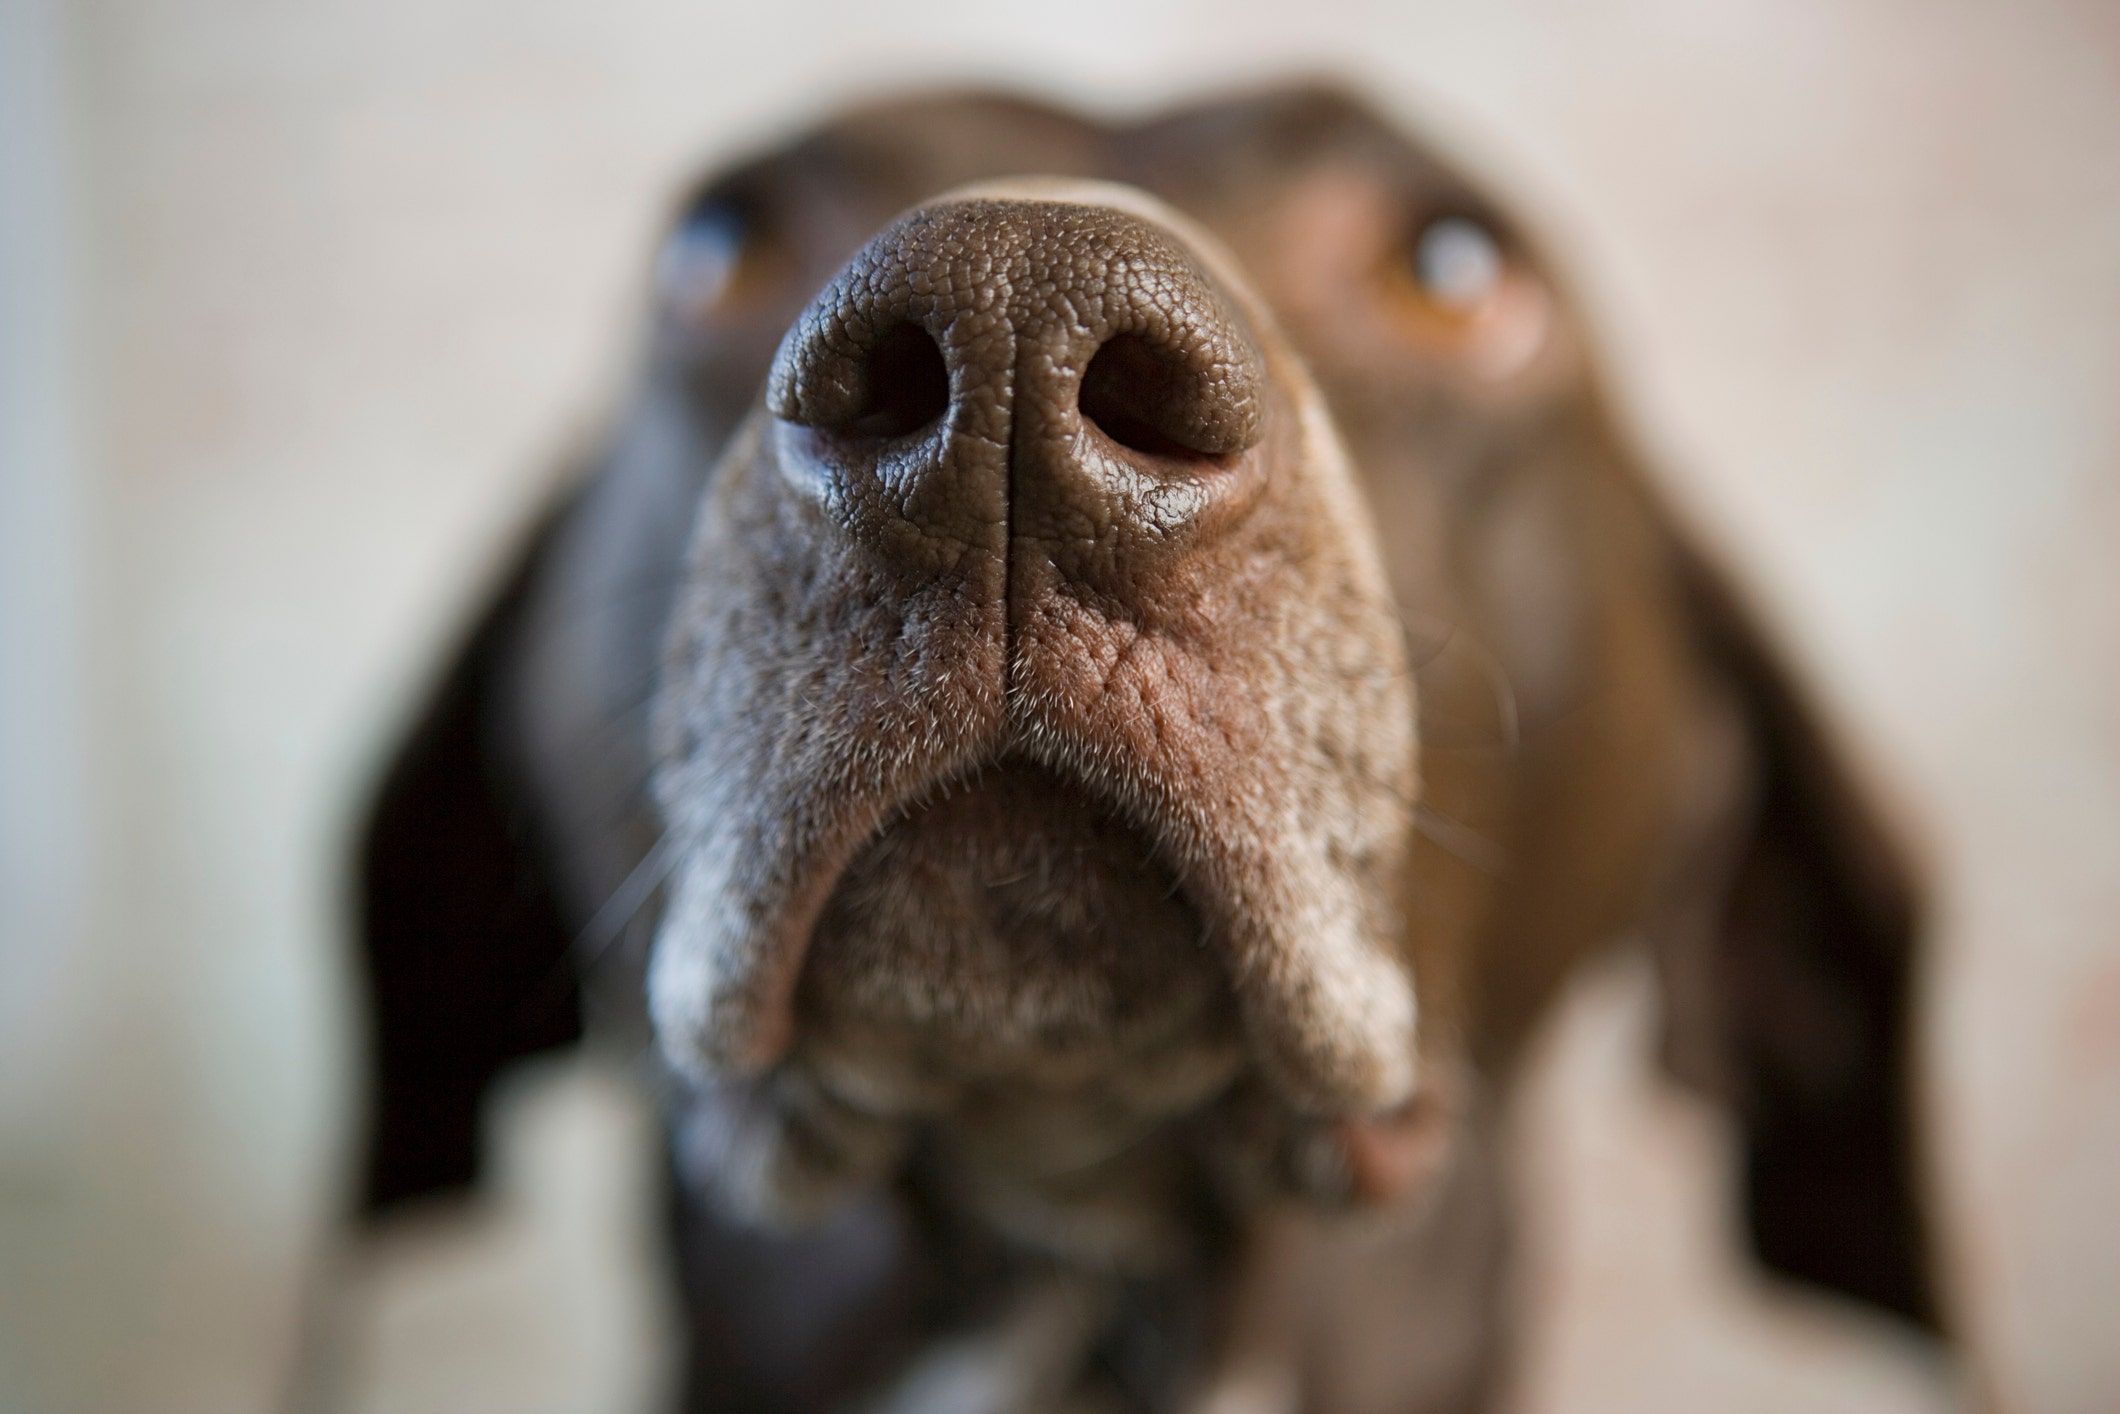 Trained dogs can smell coronavirus in your pee